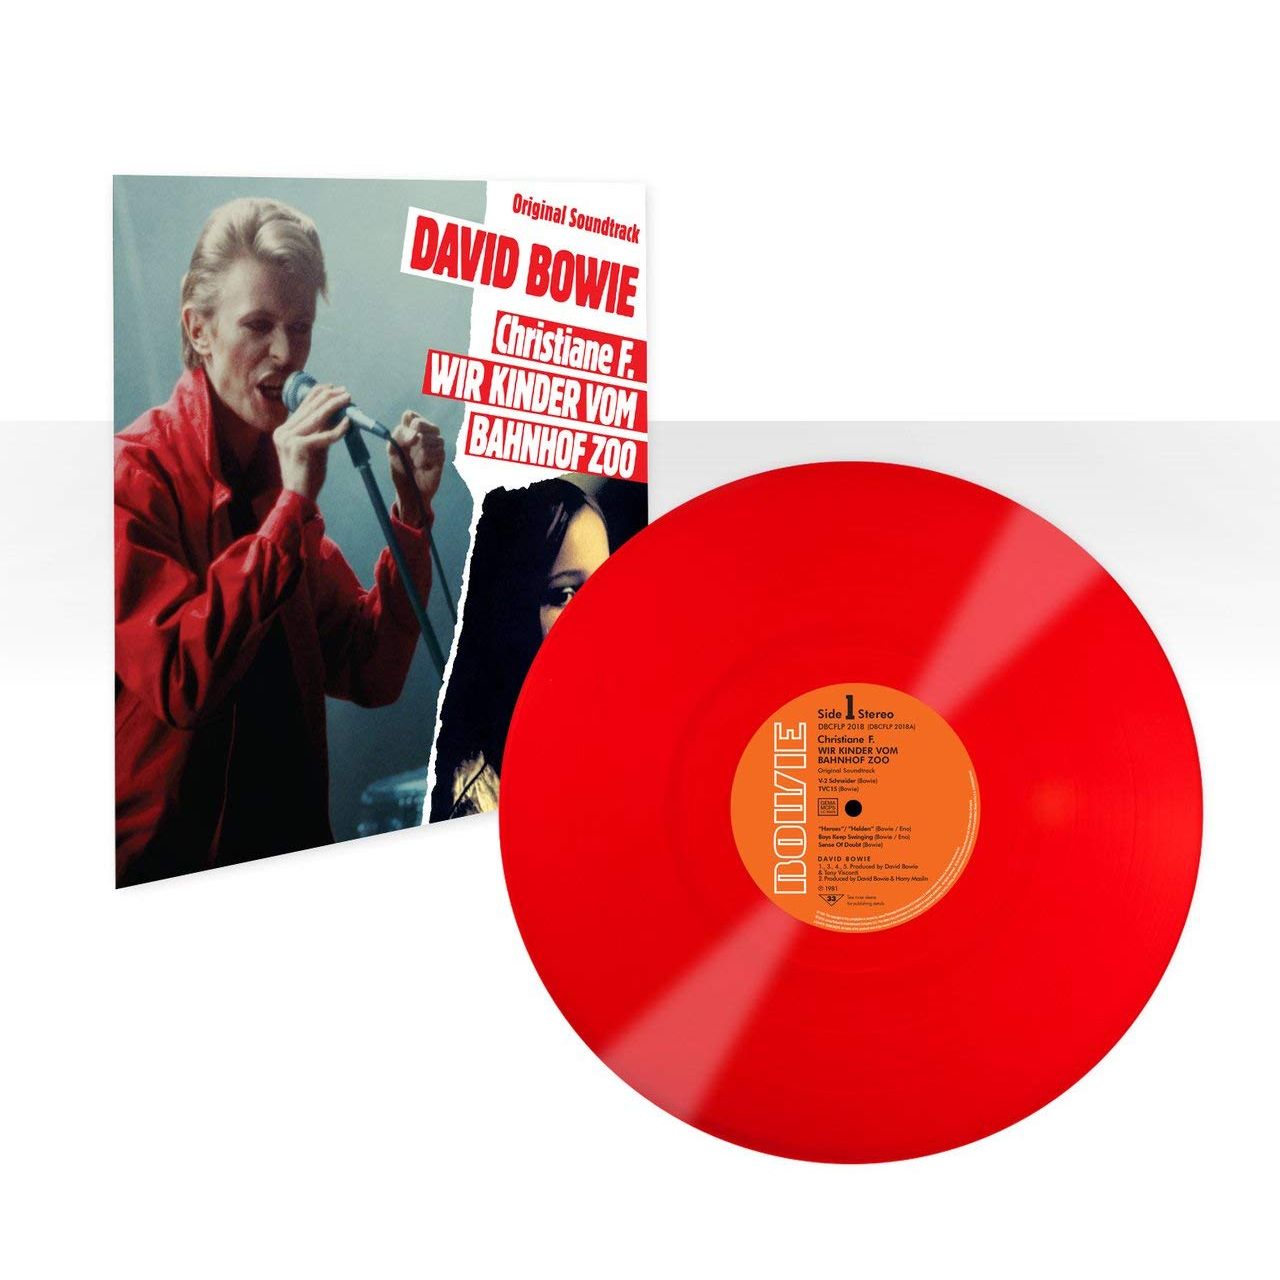 DAVID BOWIE / デヴィッド・ボウイ / CHRISTIANE F. - WIR KINDER VOM BAHNHOF ZOO (COLORED LP)